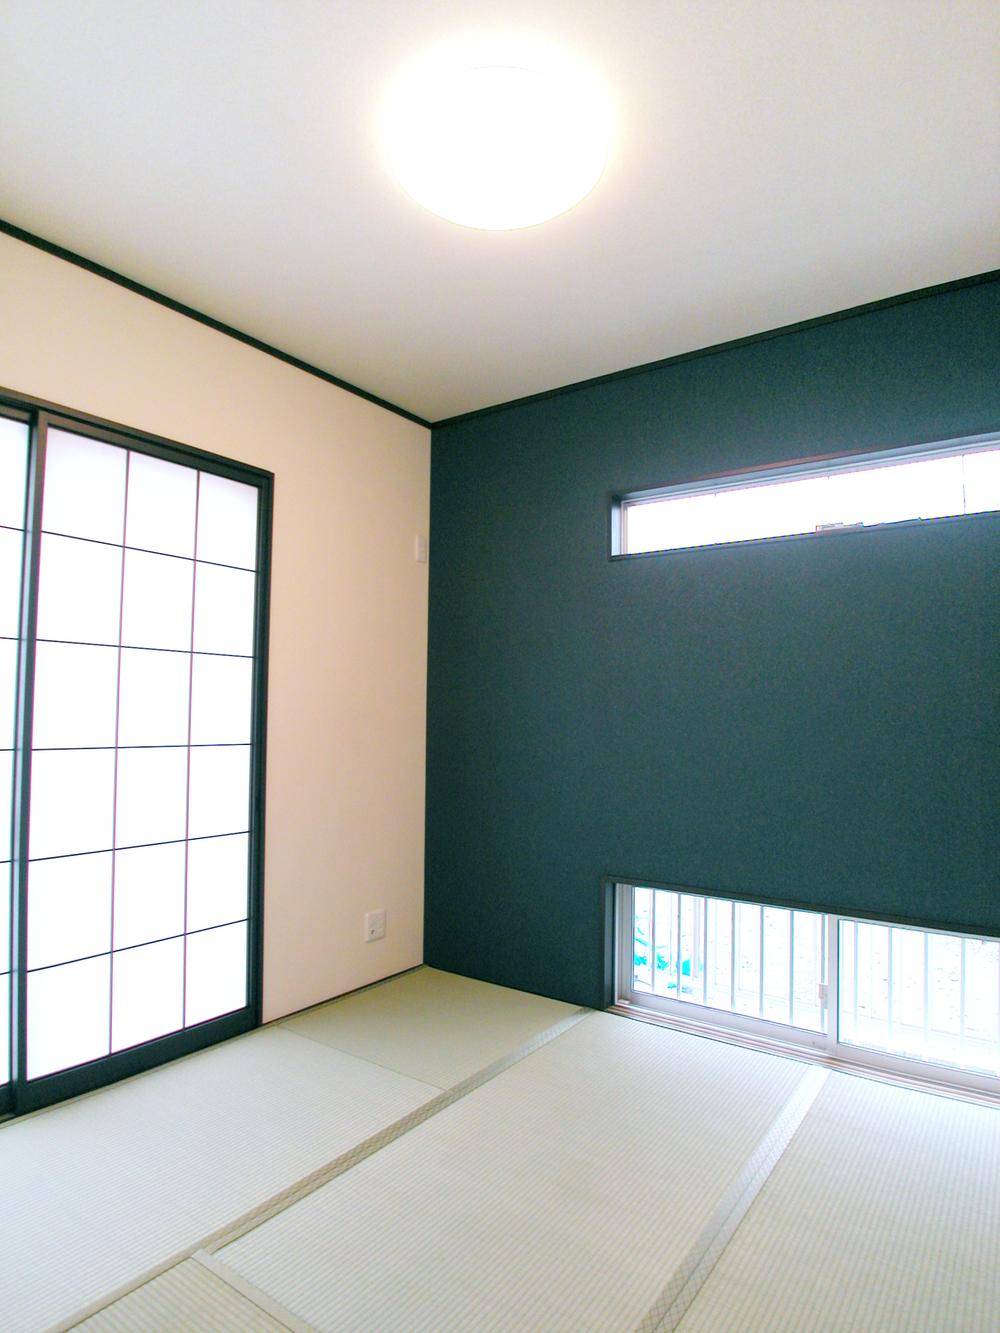 Building plan example (introspection photo). Japanese-style room  